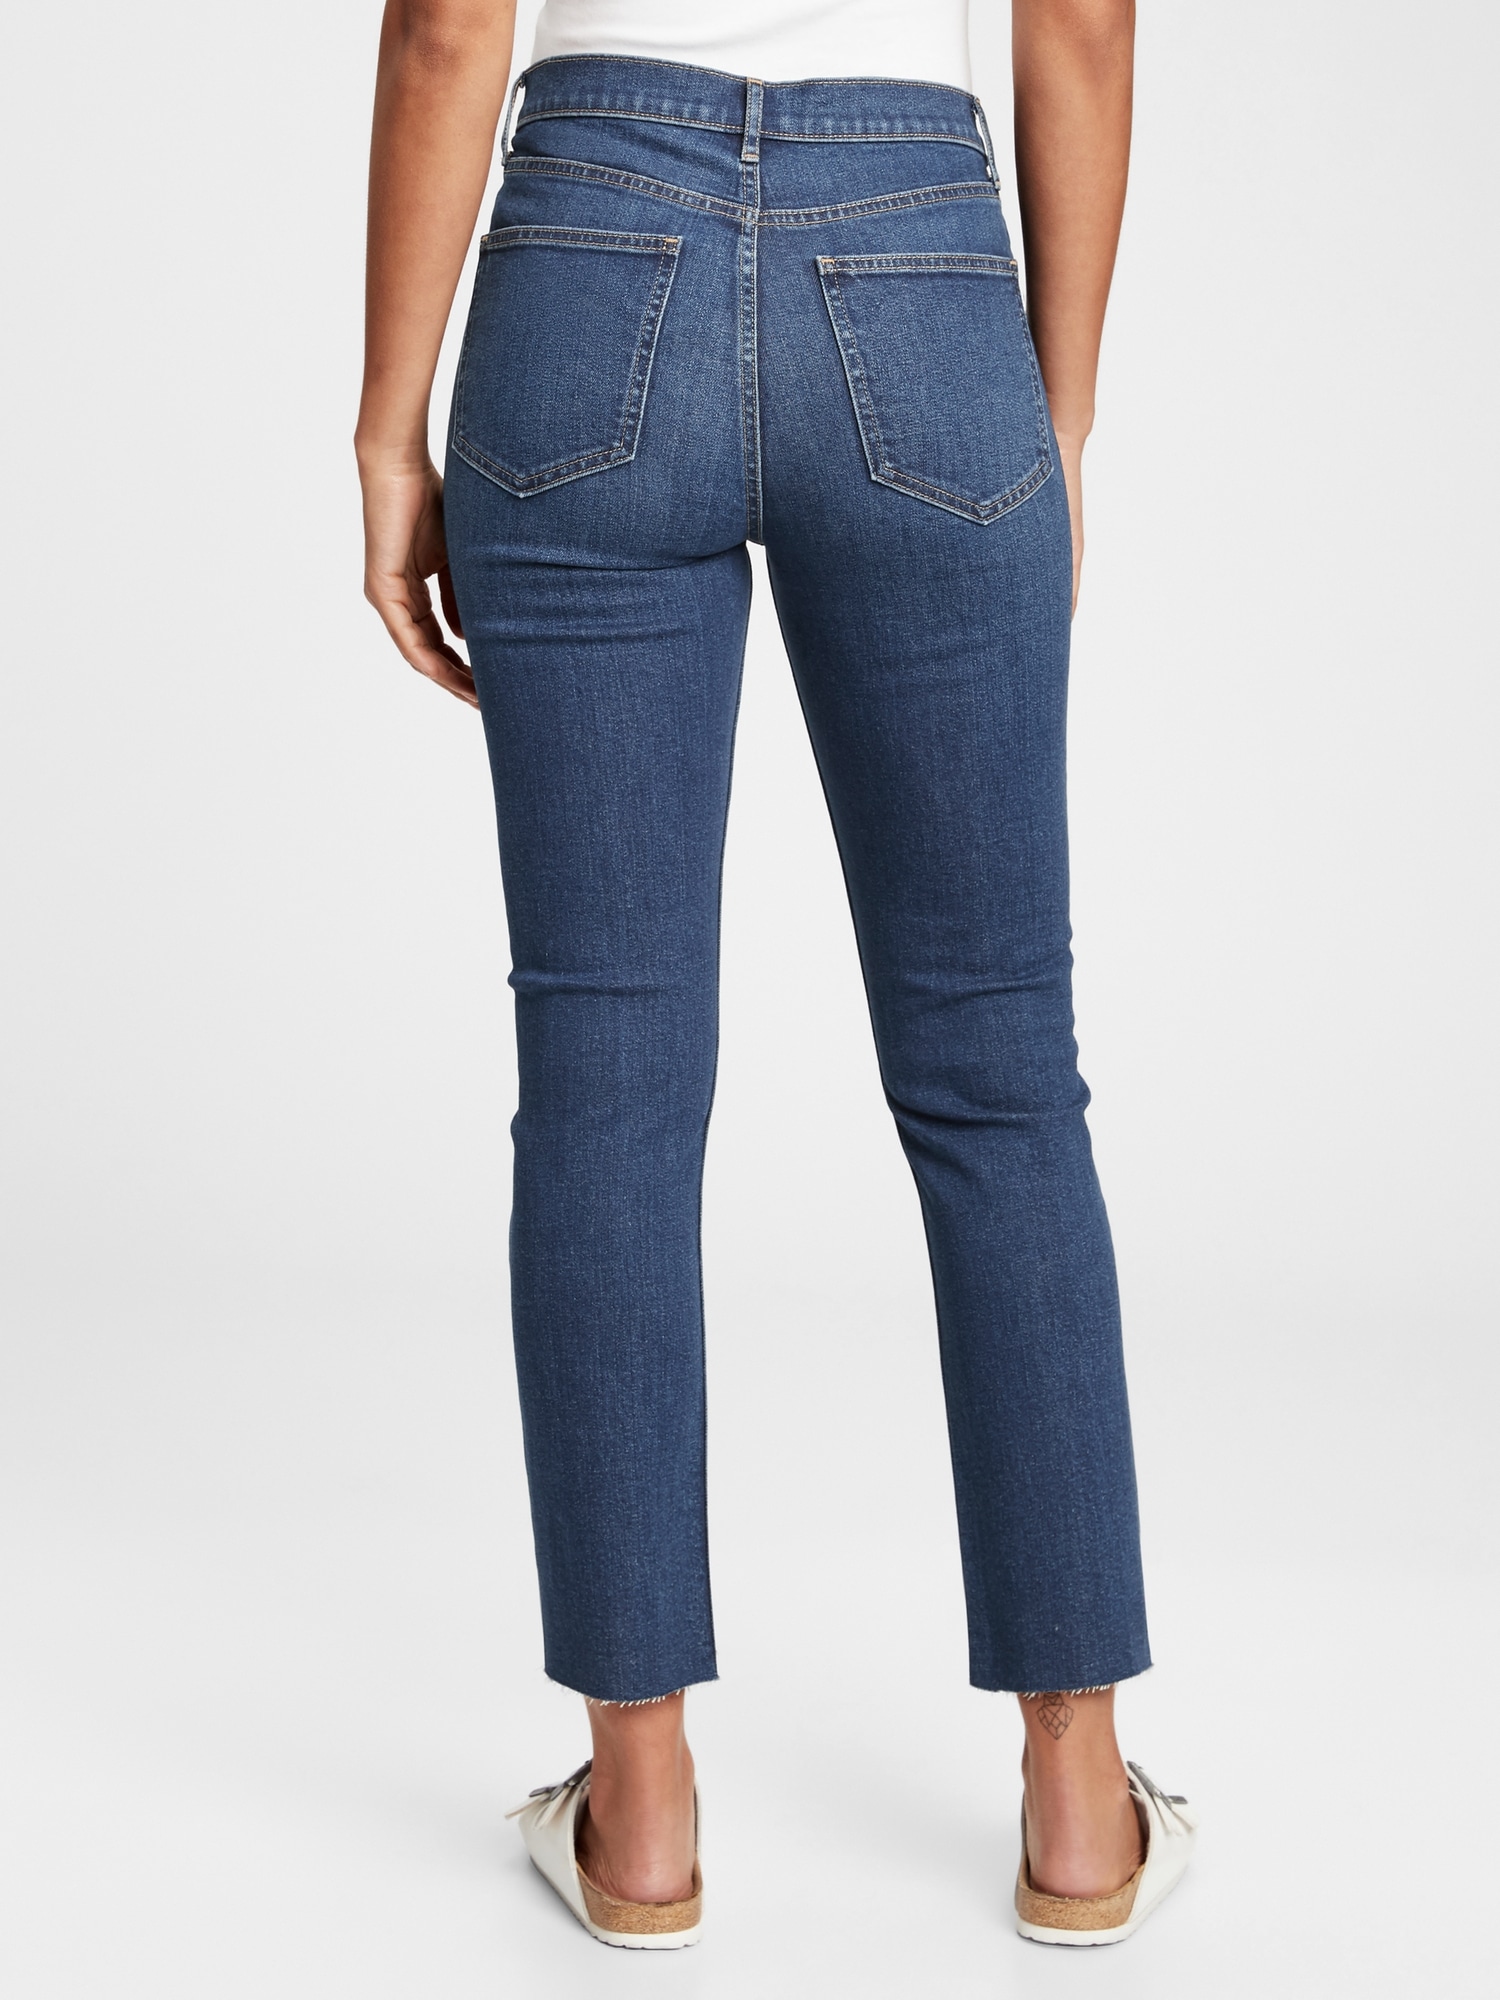 Rise Vintage Slim Jeans with Washwell | Gap